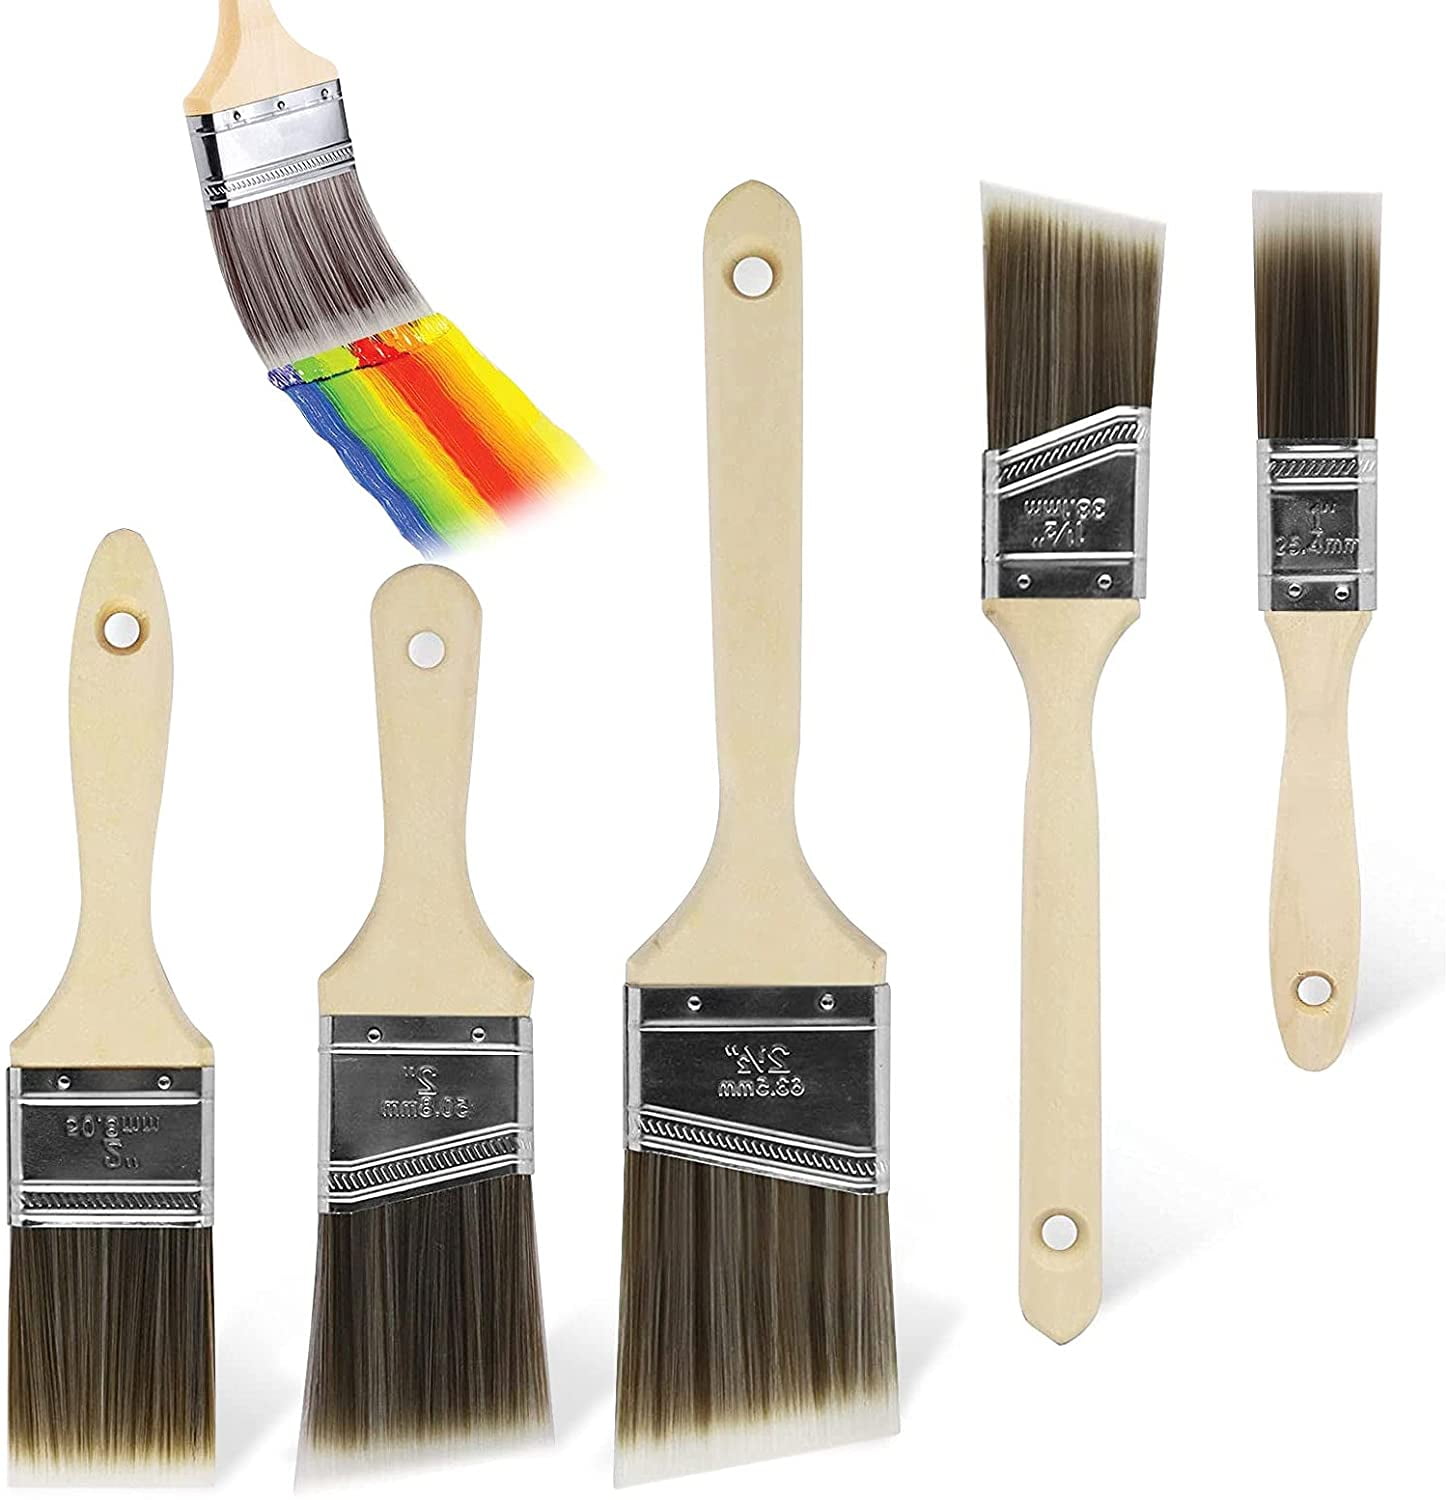 Lot of FIVE NEW Cabot 4 Block Wood Stain Brushes, Paint Brush